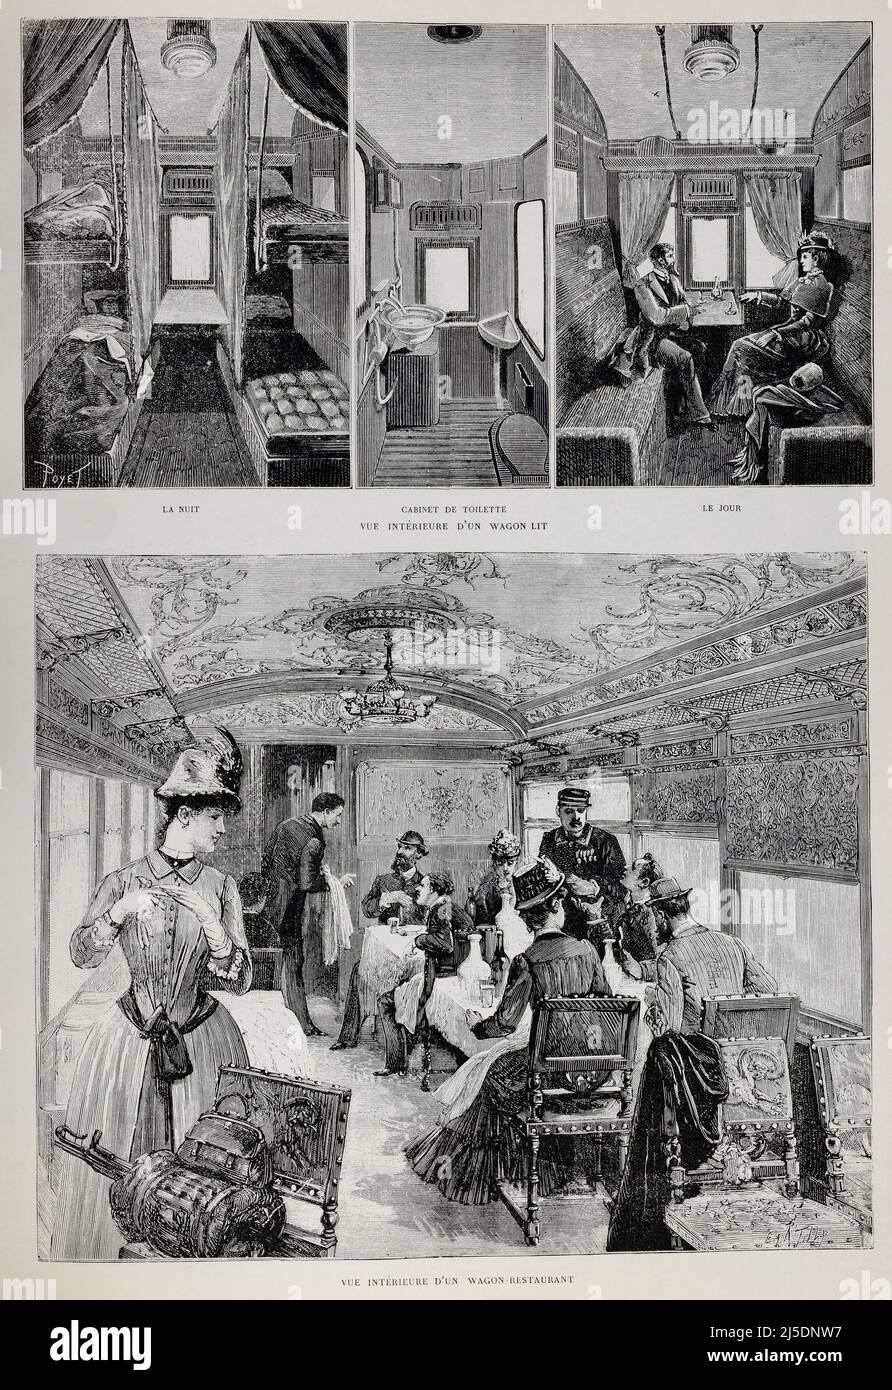 Orient Express - Extract from 'L'Illustration Journal Universel' - French illustrated magazine - 1884 Stock Photo